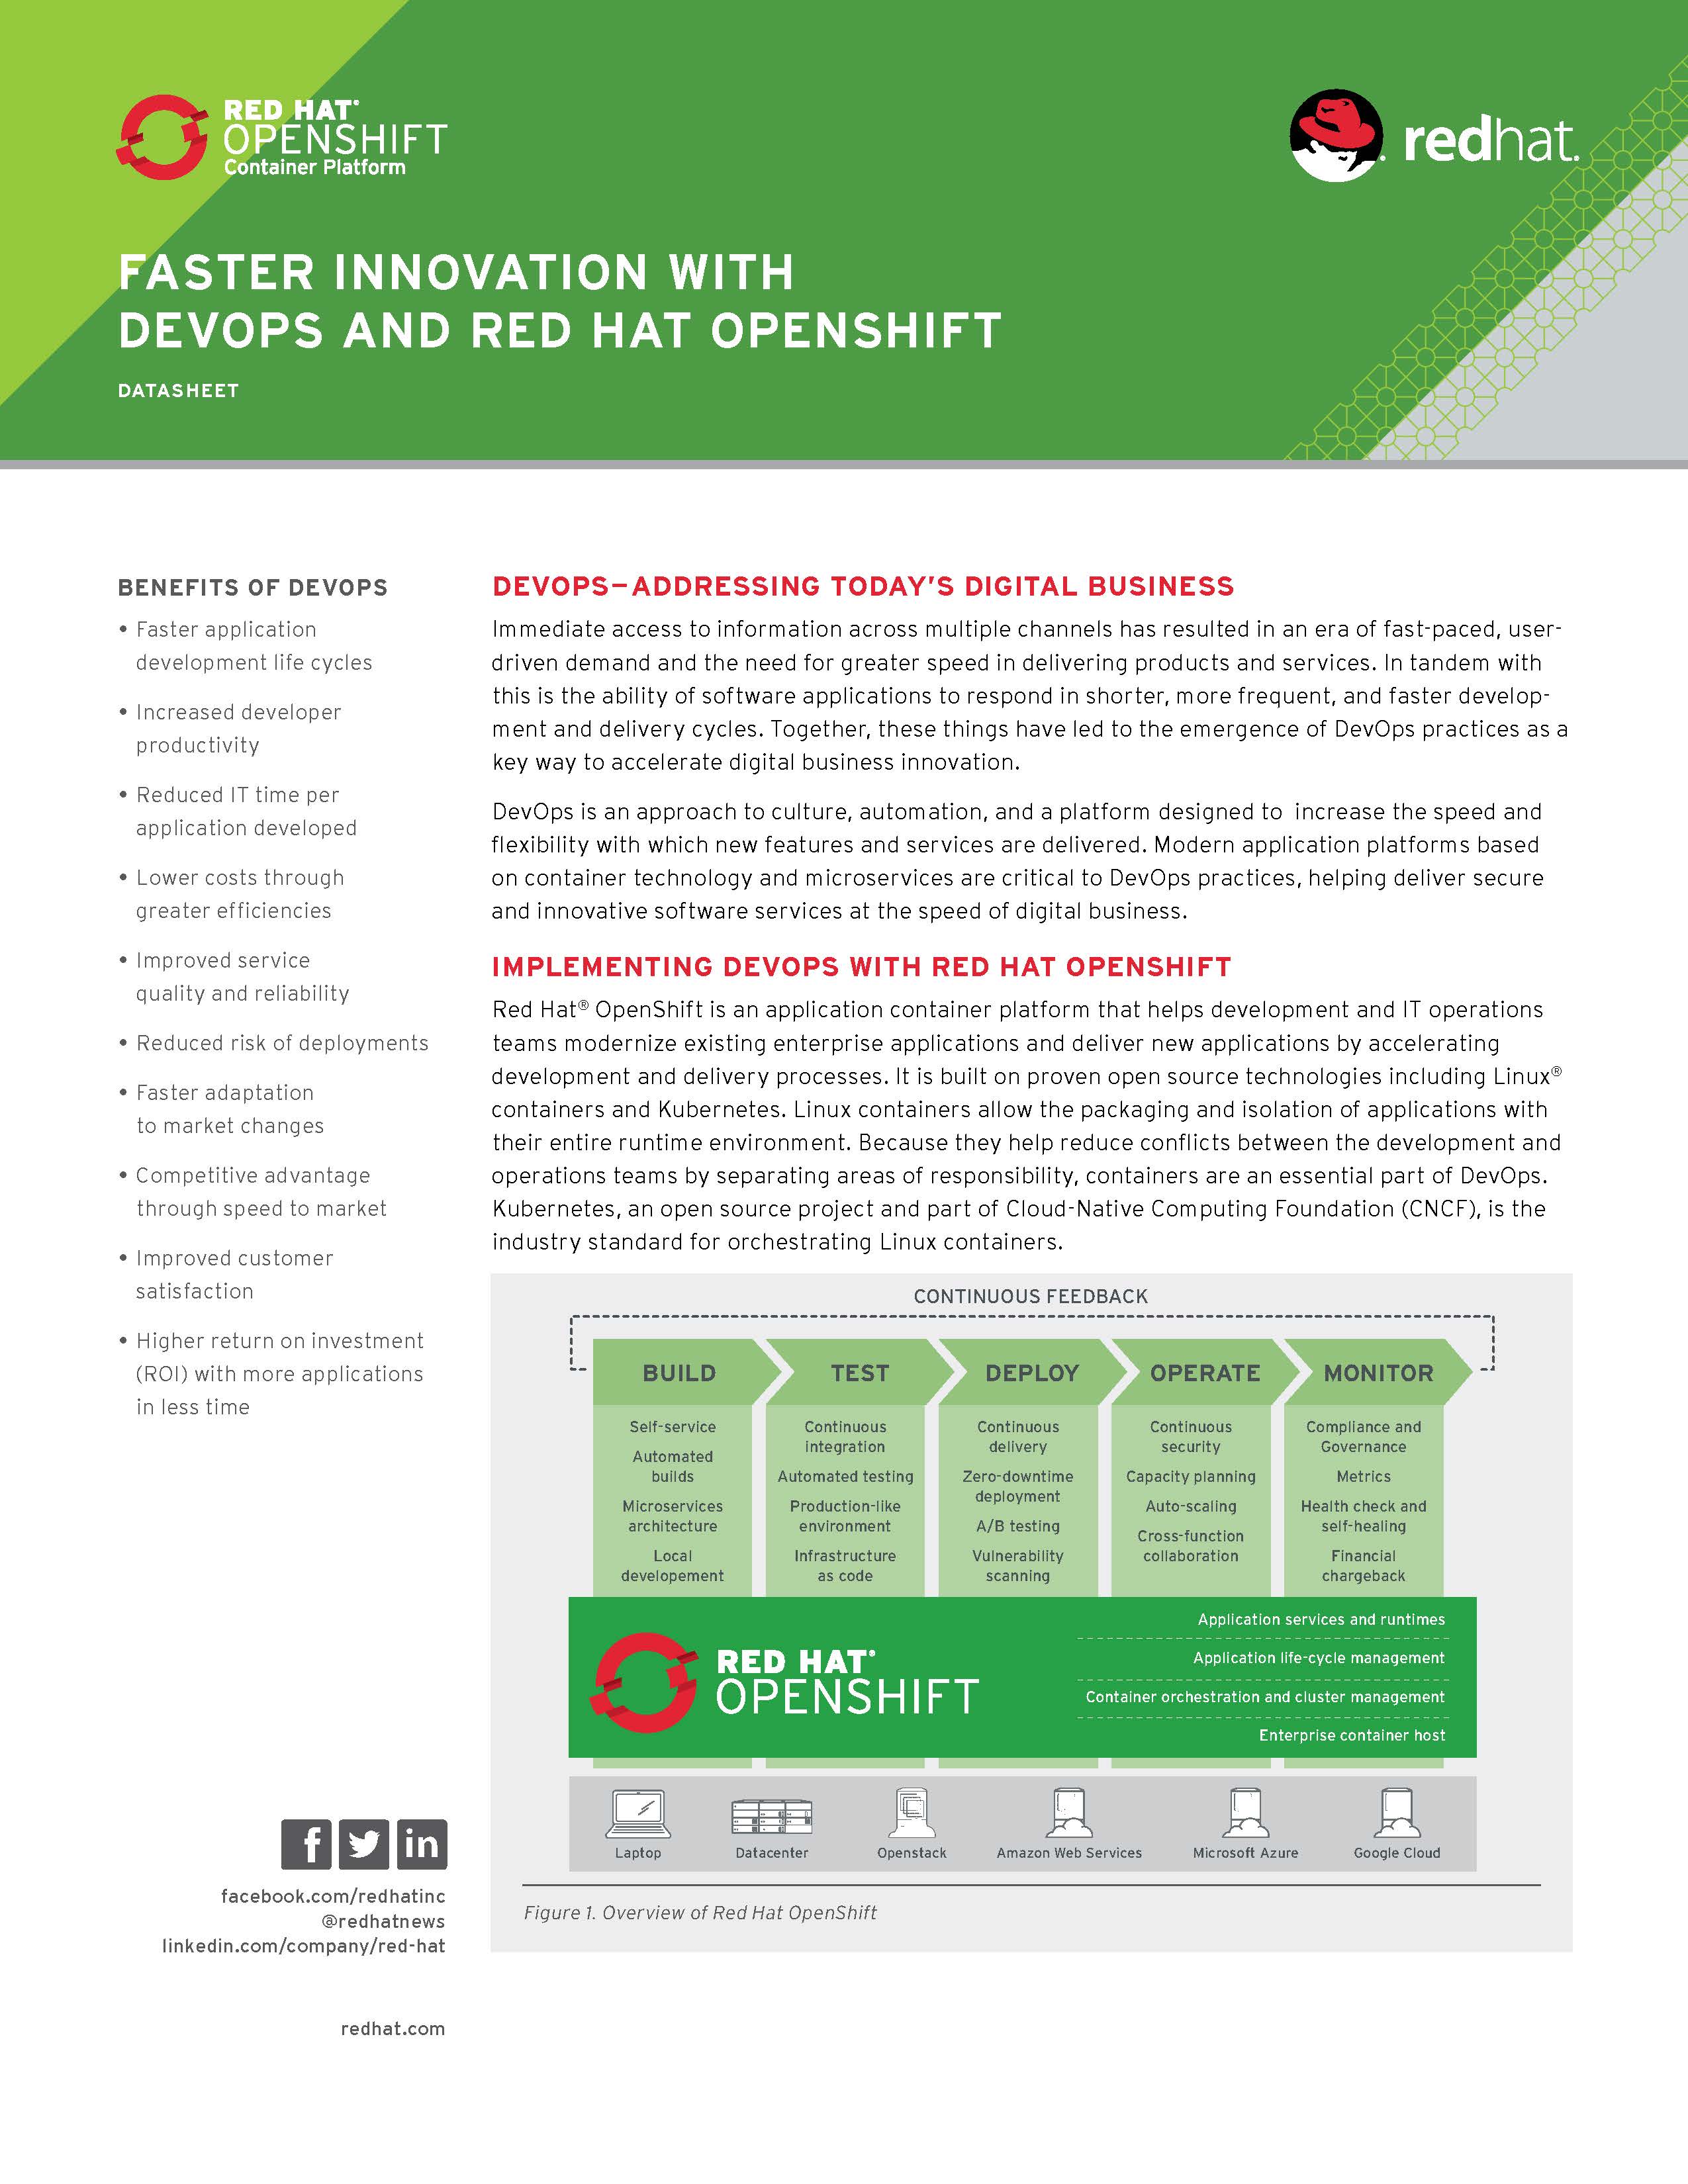 cl-faster-inovation-with-devops-and-openshift-datasheet-f8713kc-201708-en_Page_1